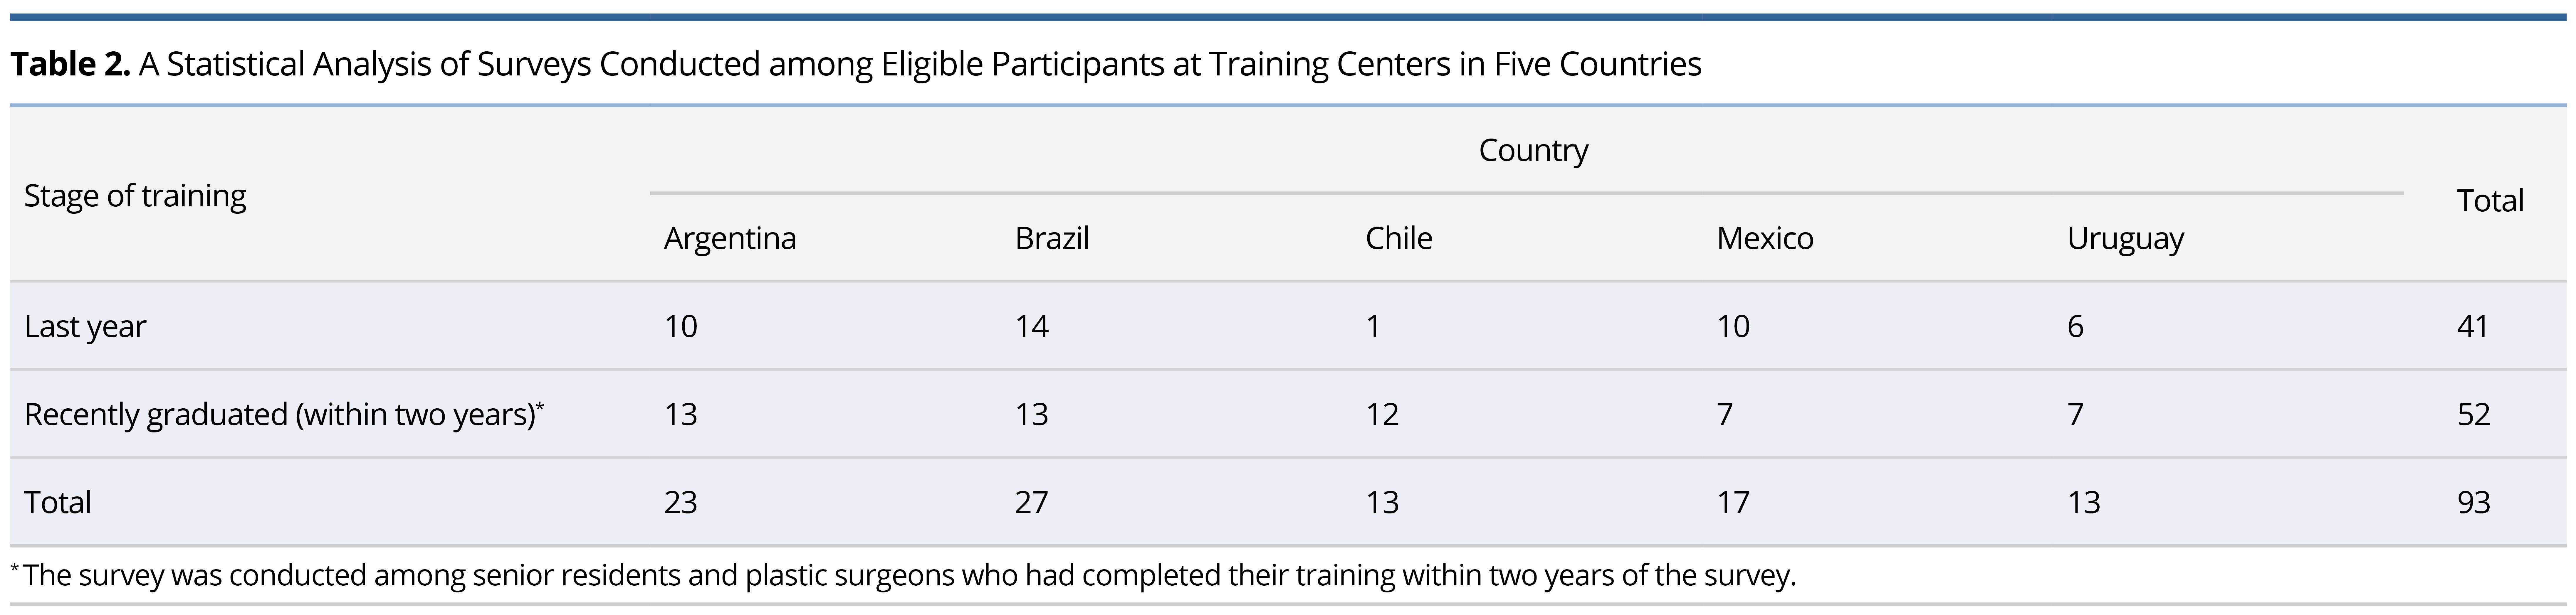 Table 2.jpgA Statistical Analysis of Surveys Conducted among Eligible Participants at Training Centers in Five Countries